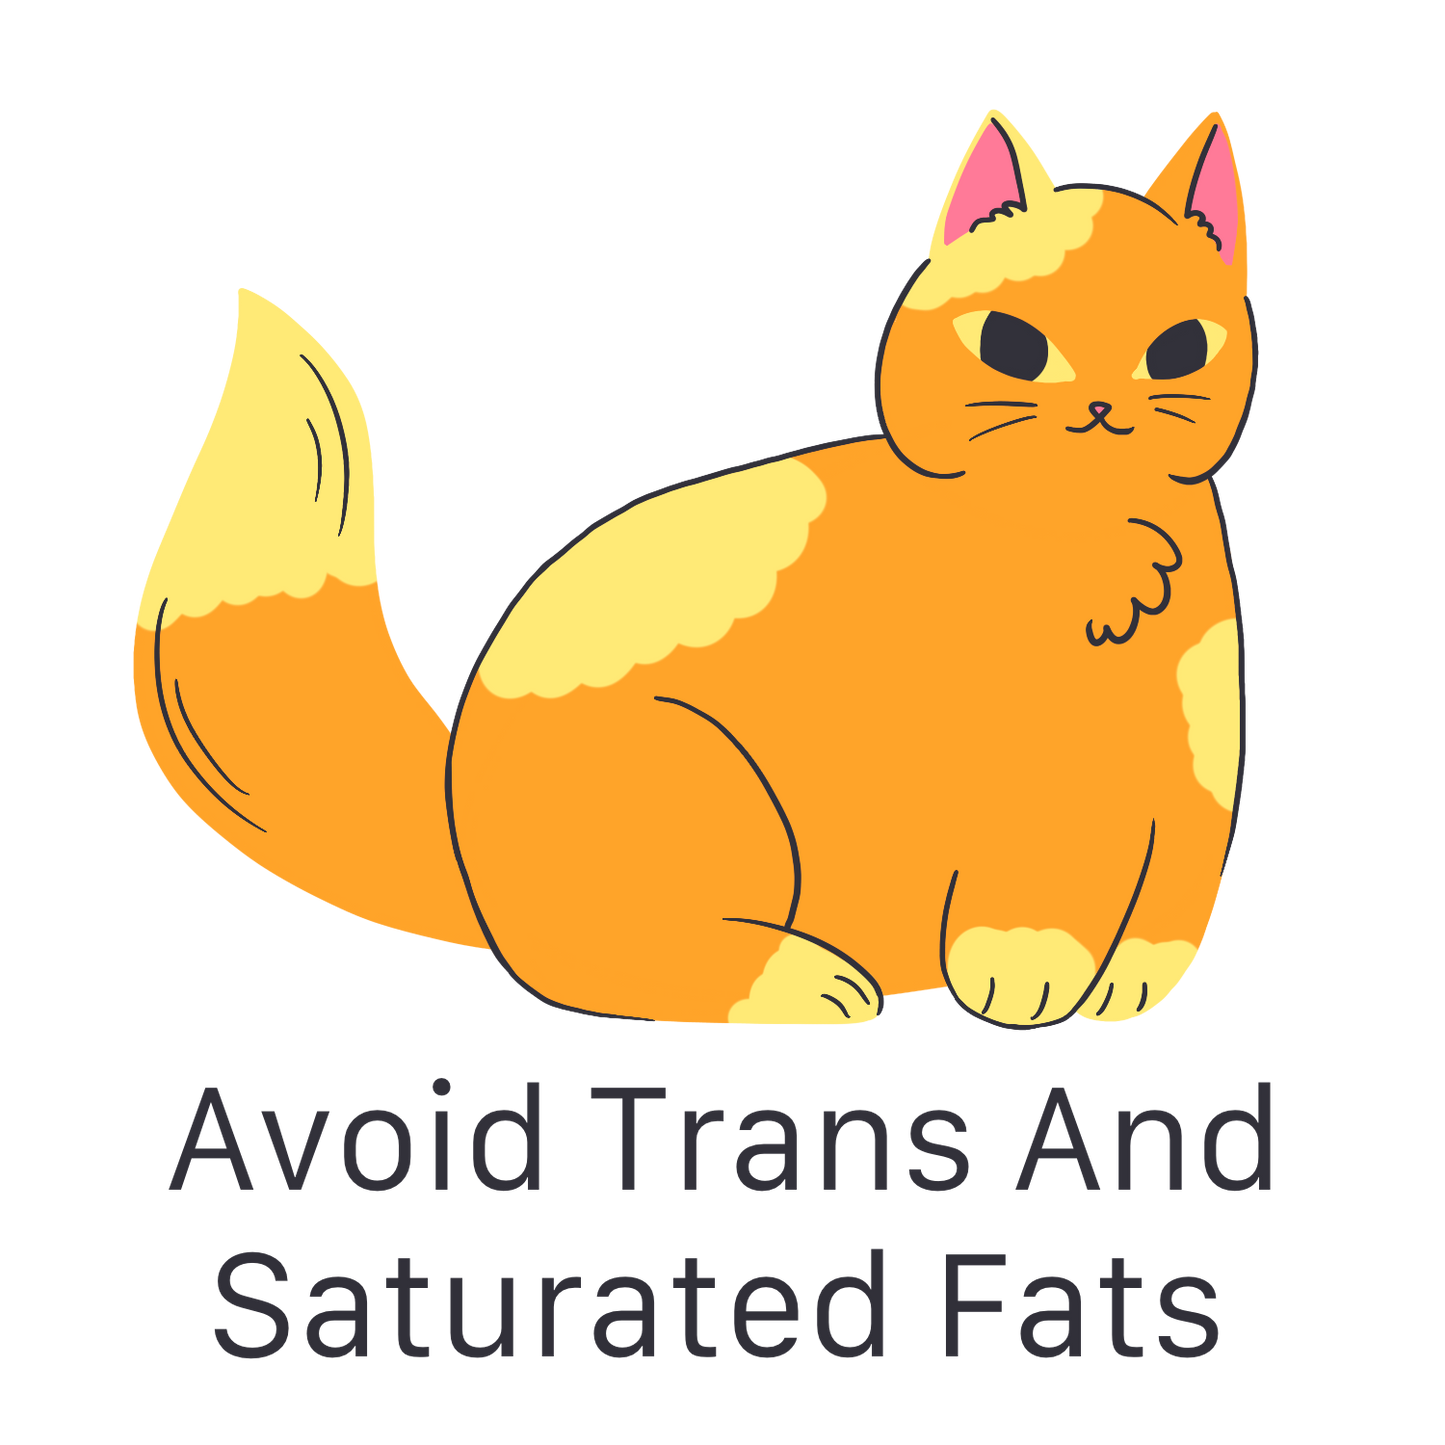 Inspirational Quote Avoid Trans And Saturated Fats Motivational Sticker Vinyl Decal Motivation Stickers- 5" Vinyl Sticker Waterproof